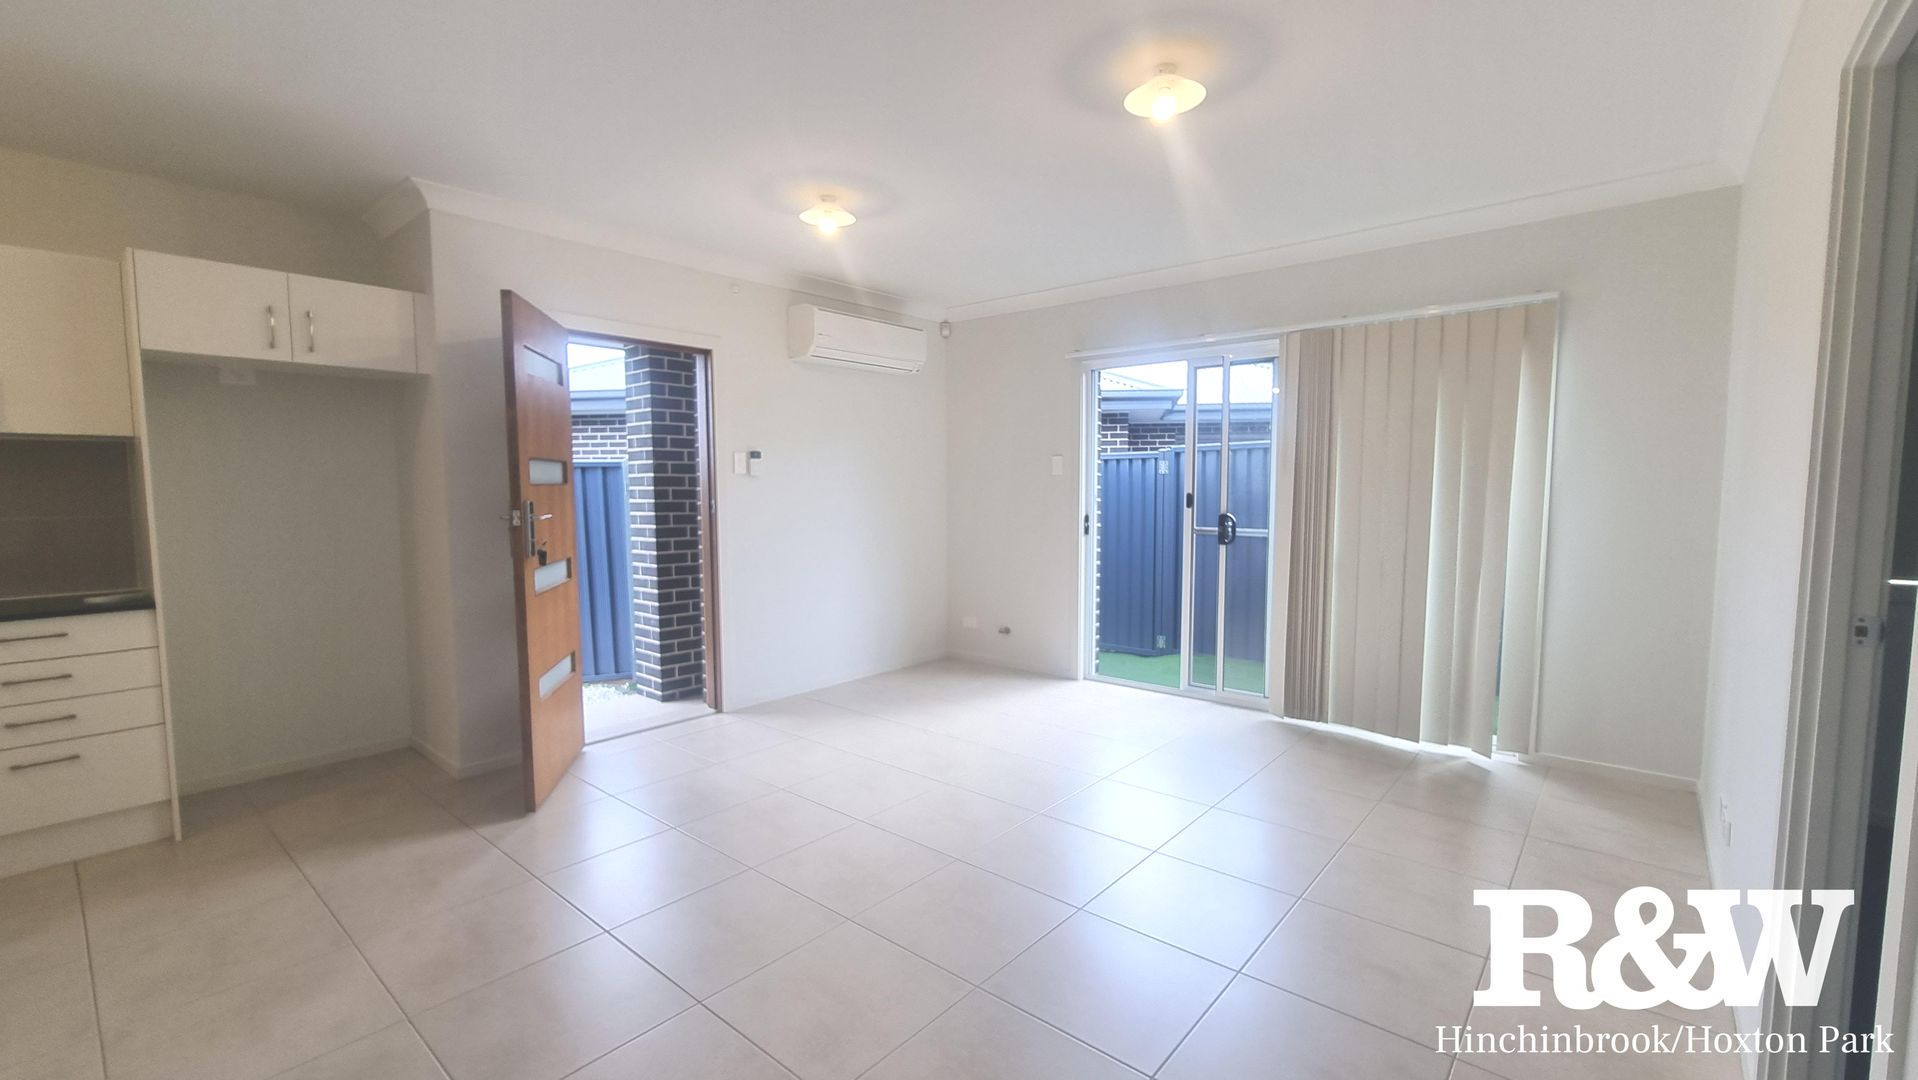 2 bedrooms House in 15A Wollahan Ave DENHAM COURT NSW, 2565